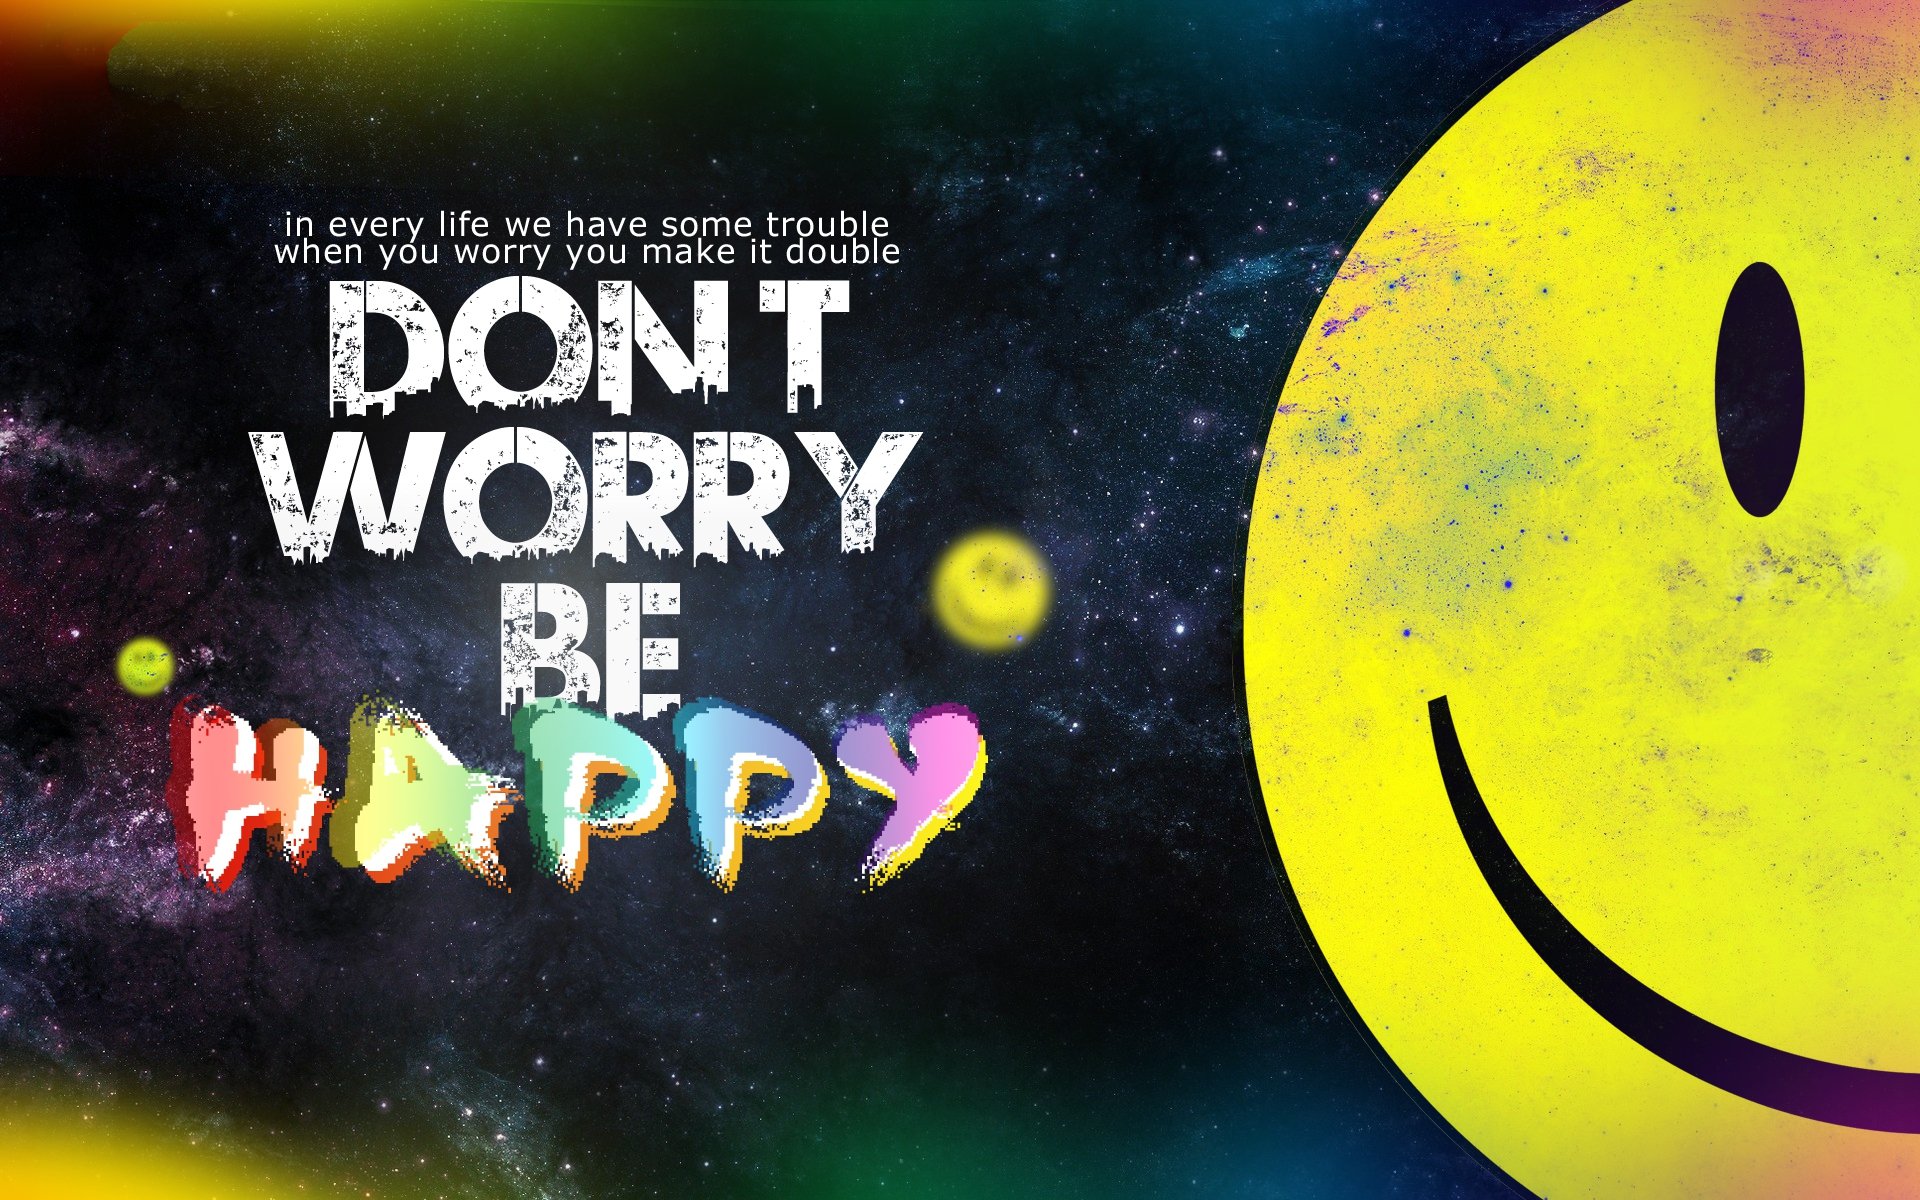 O be happy. Don't worry be Happy. Донт вори би Хэппи. Надпись don't worry be Happy. Надпись донт вори би Хэппи.